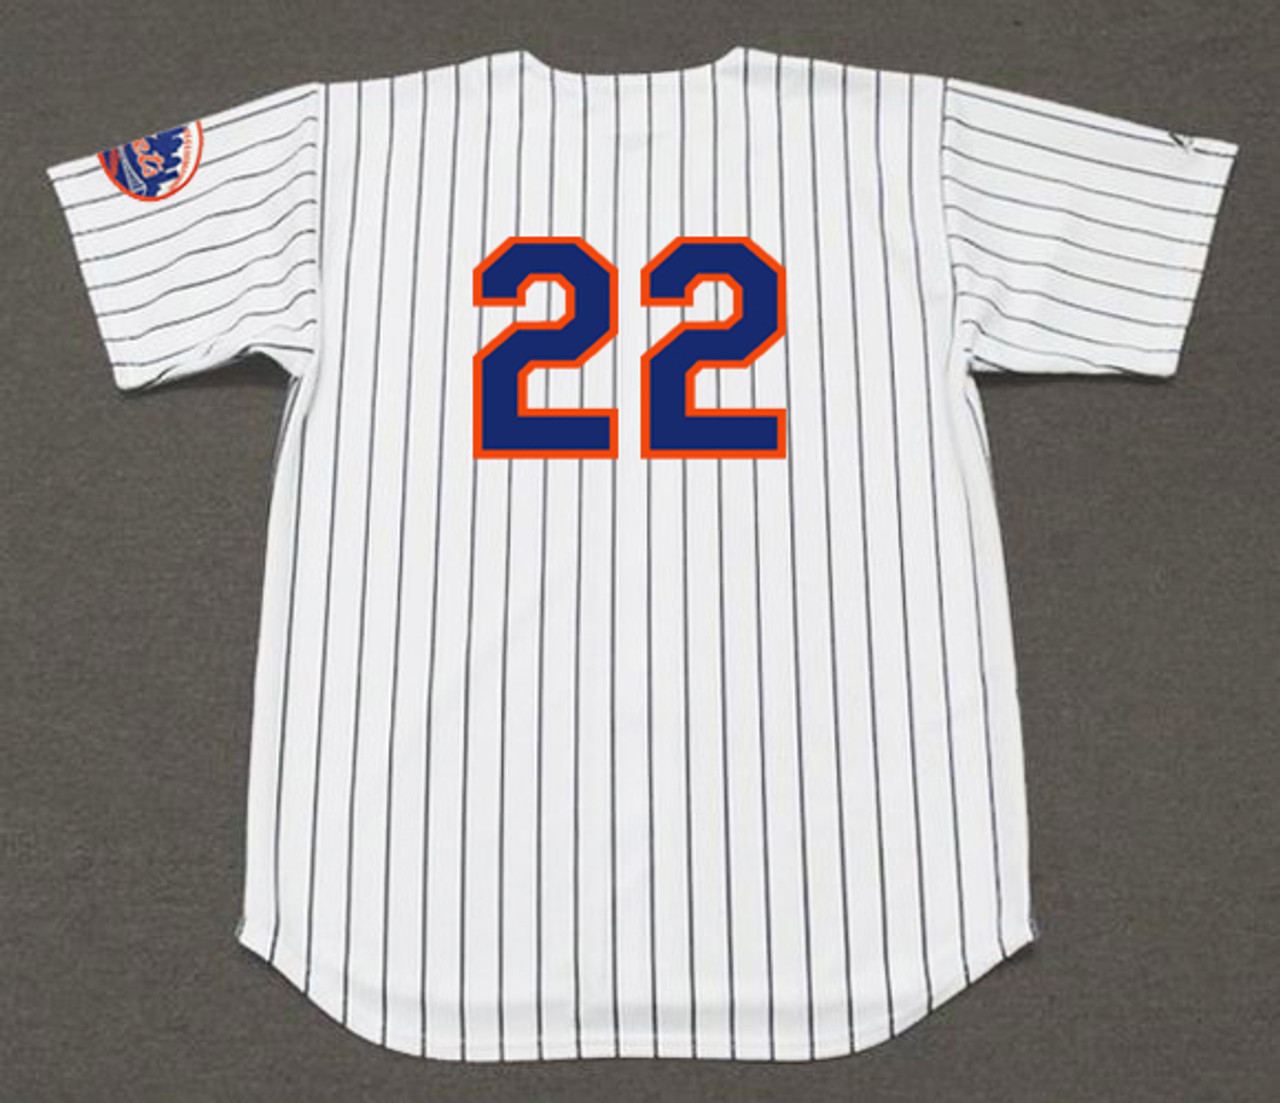 Cleon Jones #21 - White Pinstripe Jersey - 50th Anniversary of the 1969 Mets  - Worn On-Field during the Pre-Game Ceremony - 6/29/2019